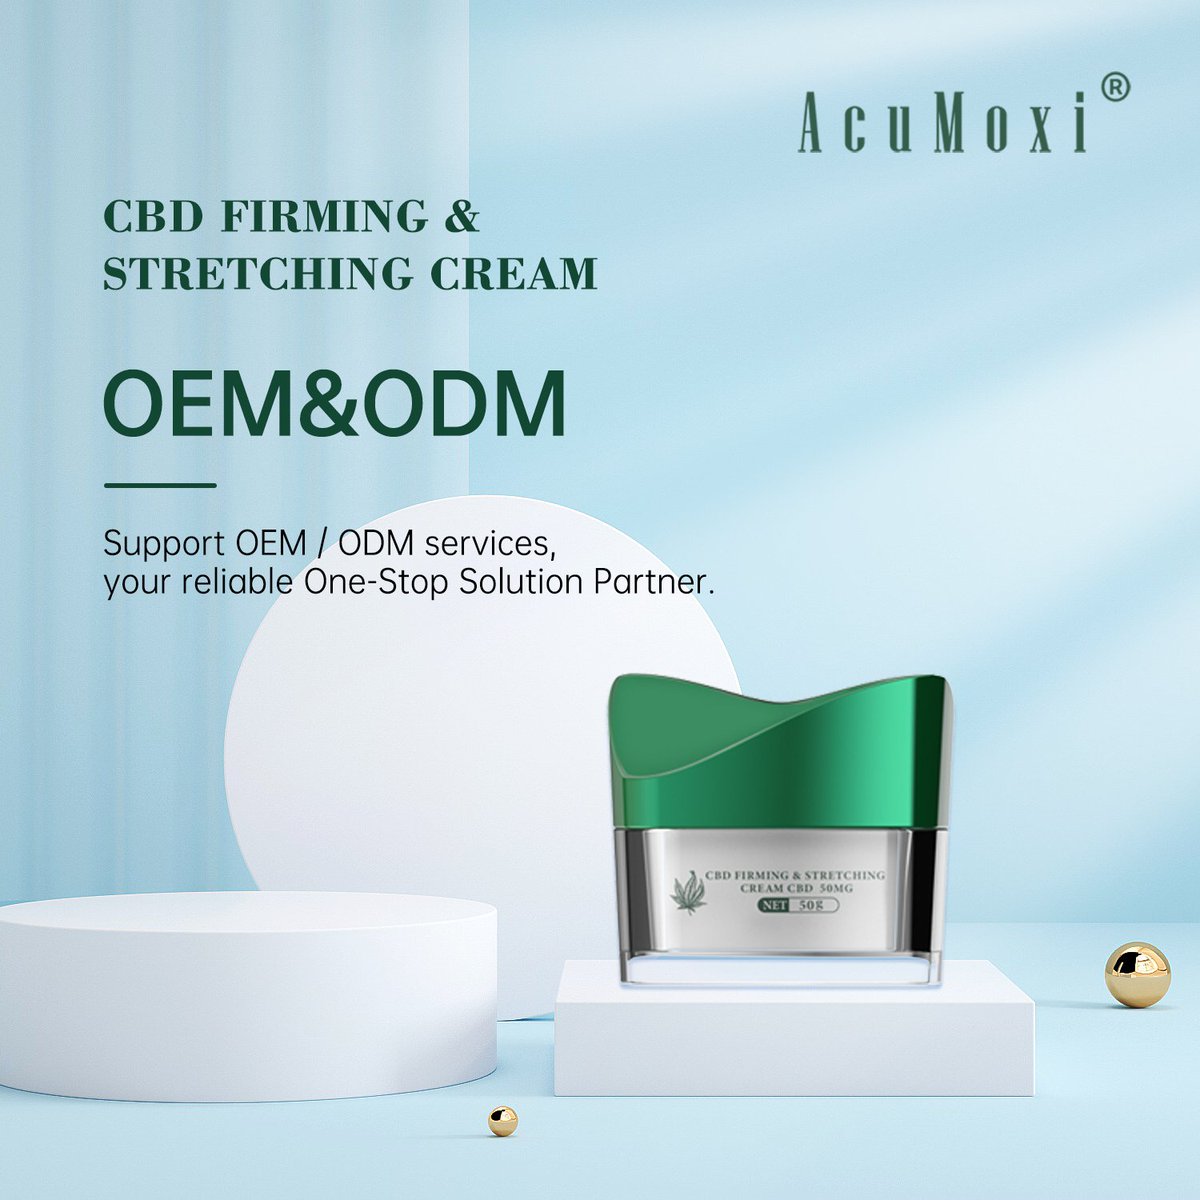 AcuMoxi CBD cosmetic.  Which could be a great assistant for beauty and massage and therapy owner. #beauty #beautysalon #beautyblogger #beautymakeup #beautyaddict #facial #facialmassage #facialtreatment #bodymassage #acupuncture #moxibustion #therapy #Cbd #cbdwellness #cbdskincare